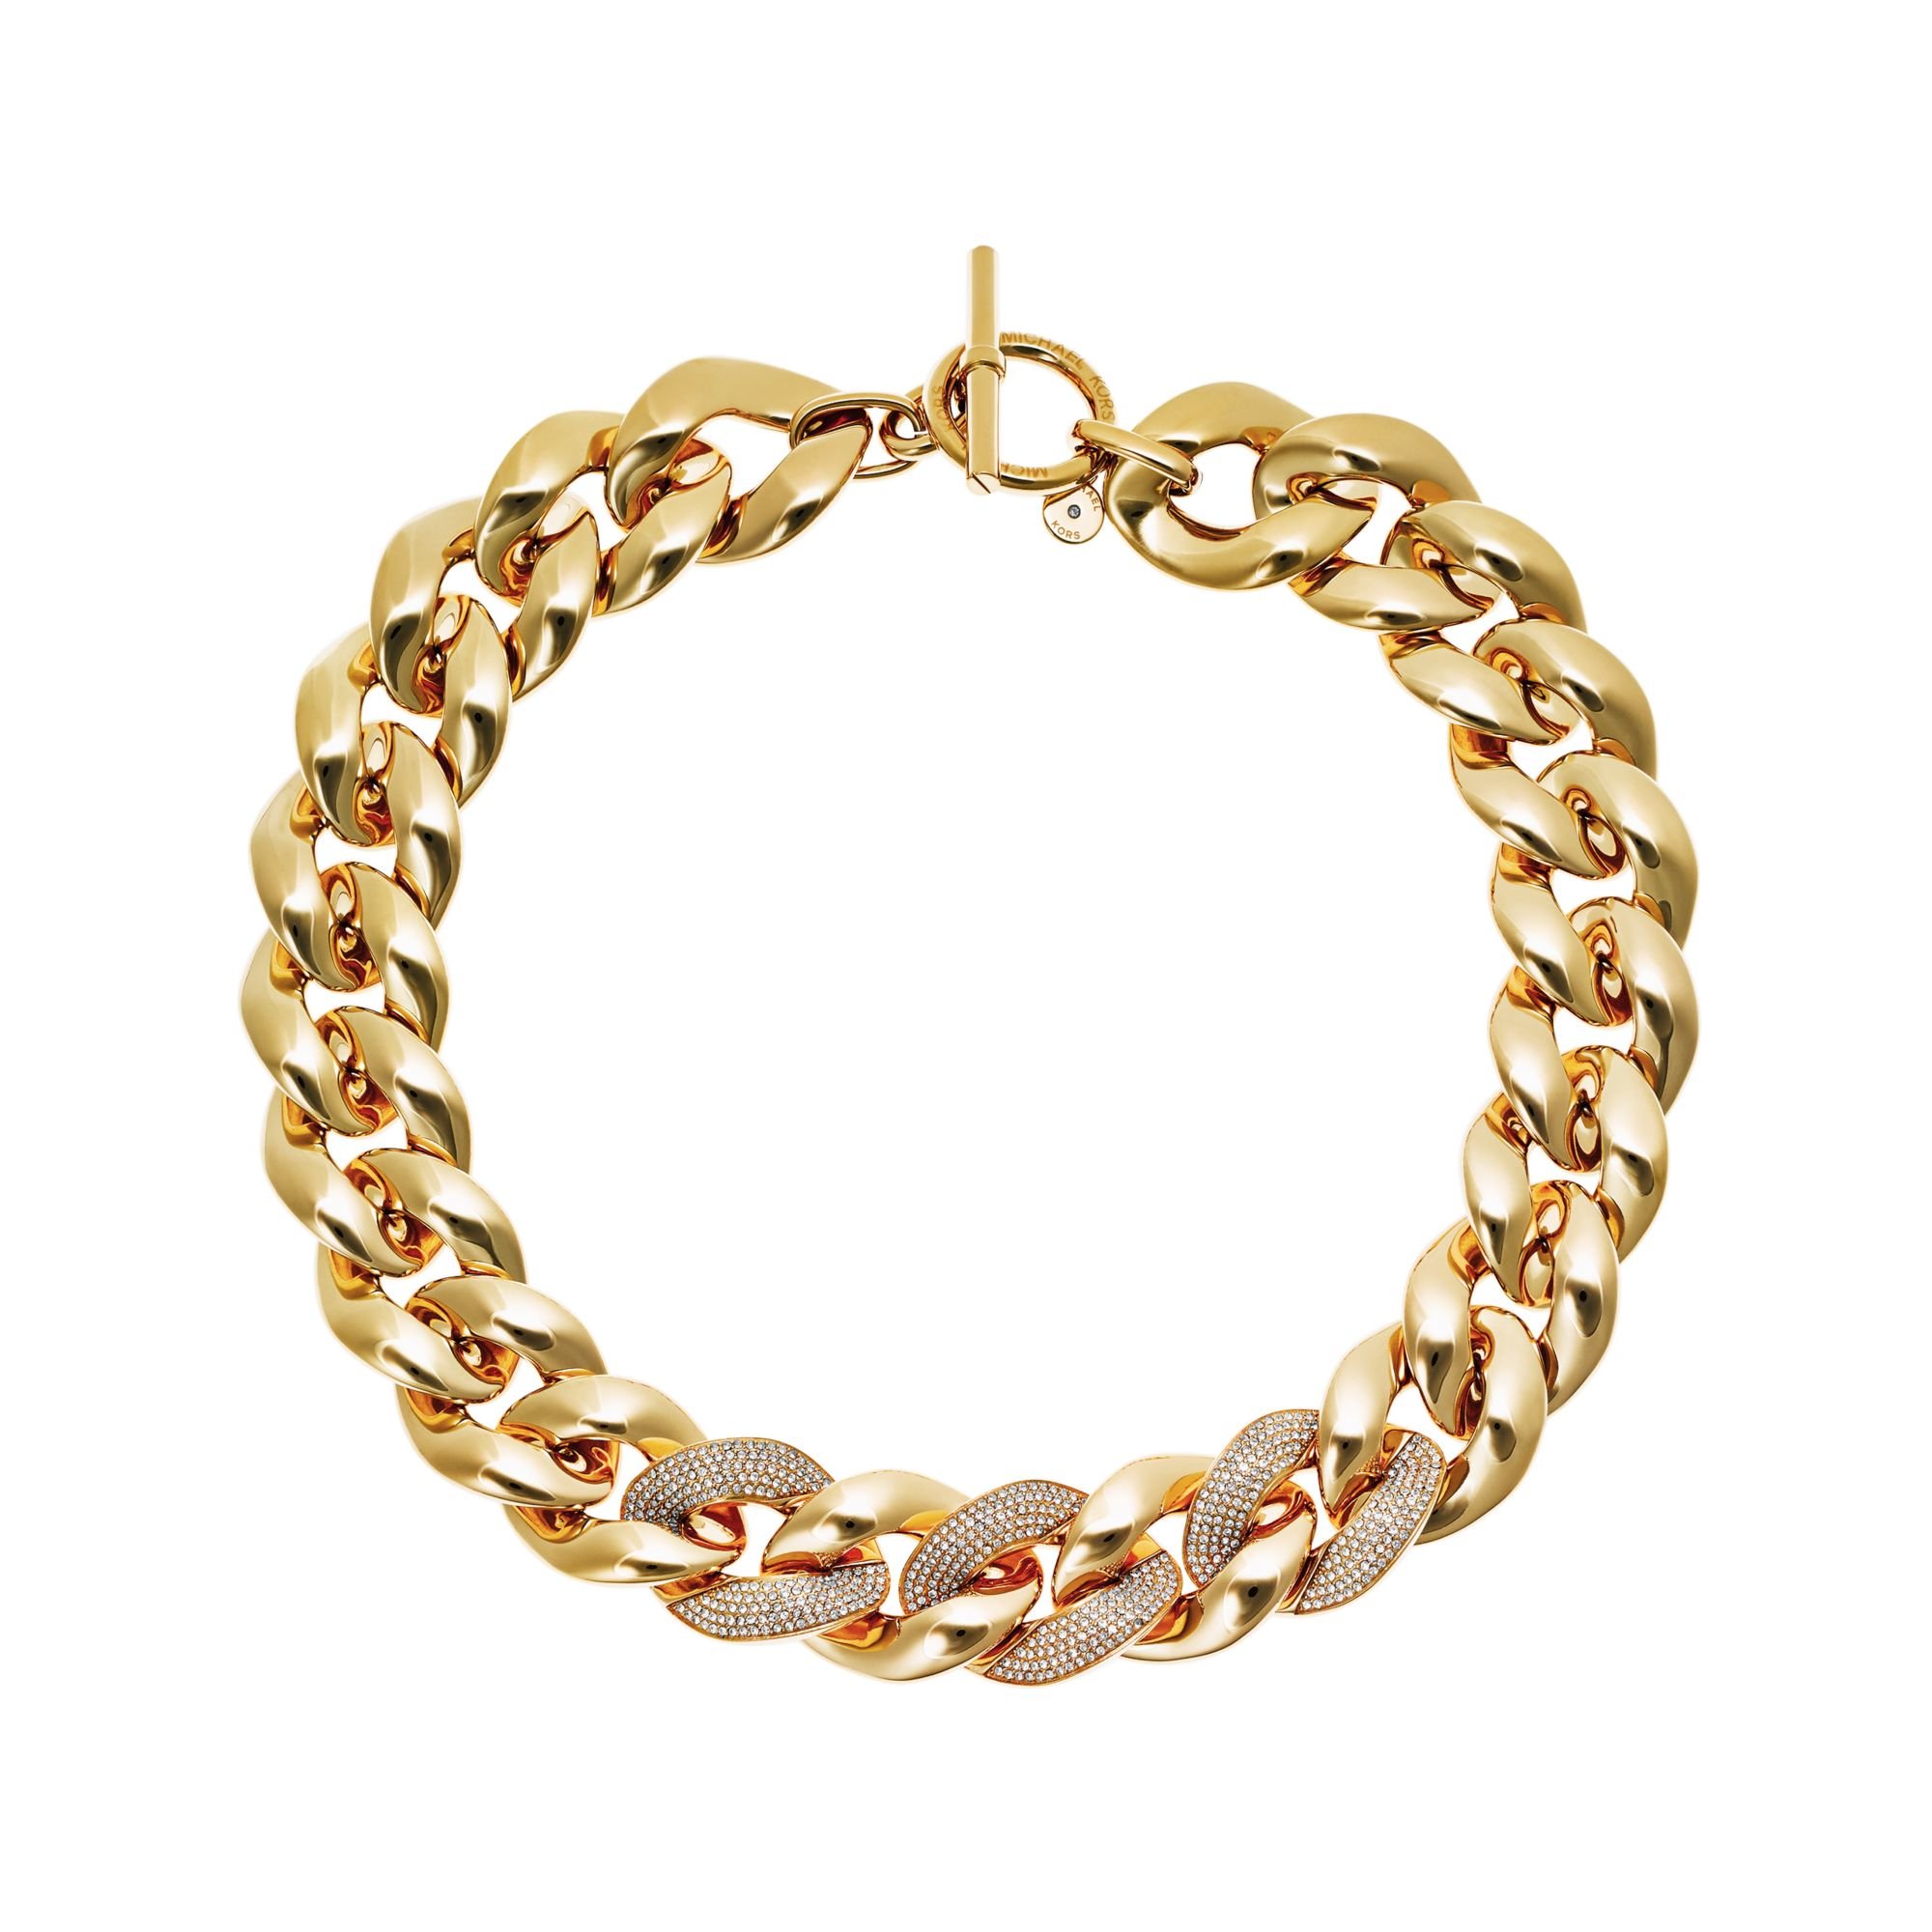 Michael kors Pave Curb Chain Link Necklace in Metallic | Lyst